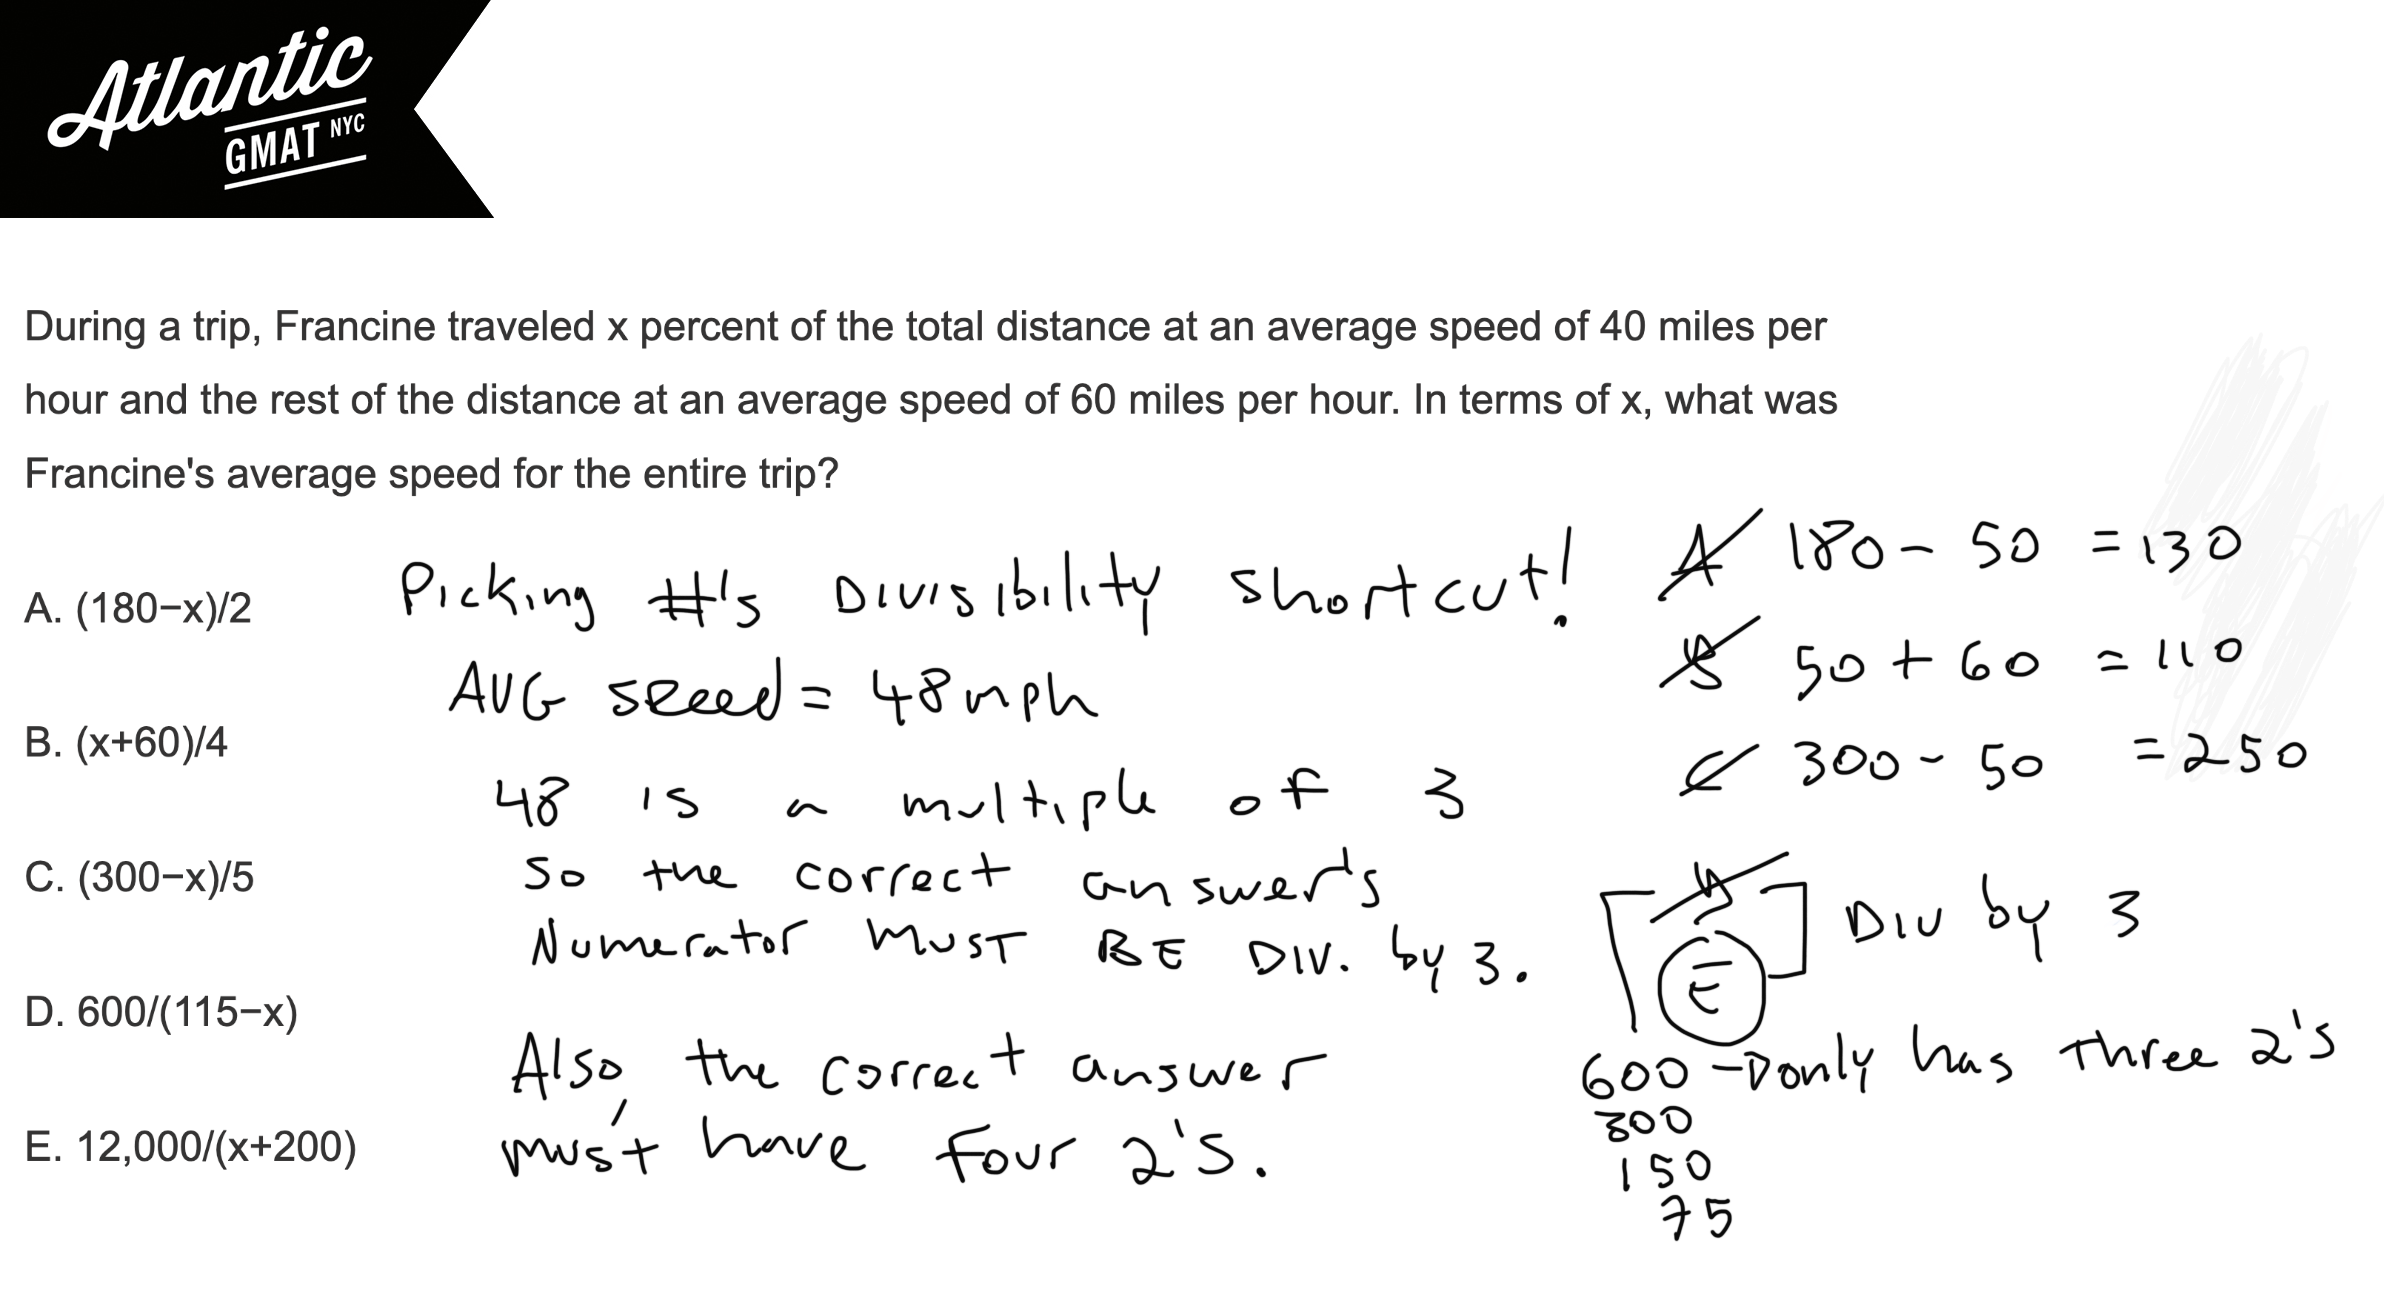 during a trip, francine traveled x percent of the total distance at an average speed of 40 miles per hour gmat explanation shortcut diagram